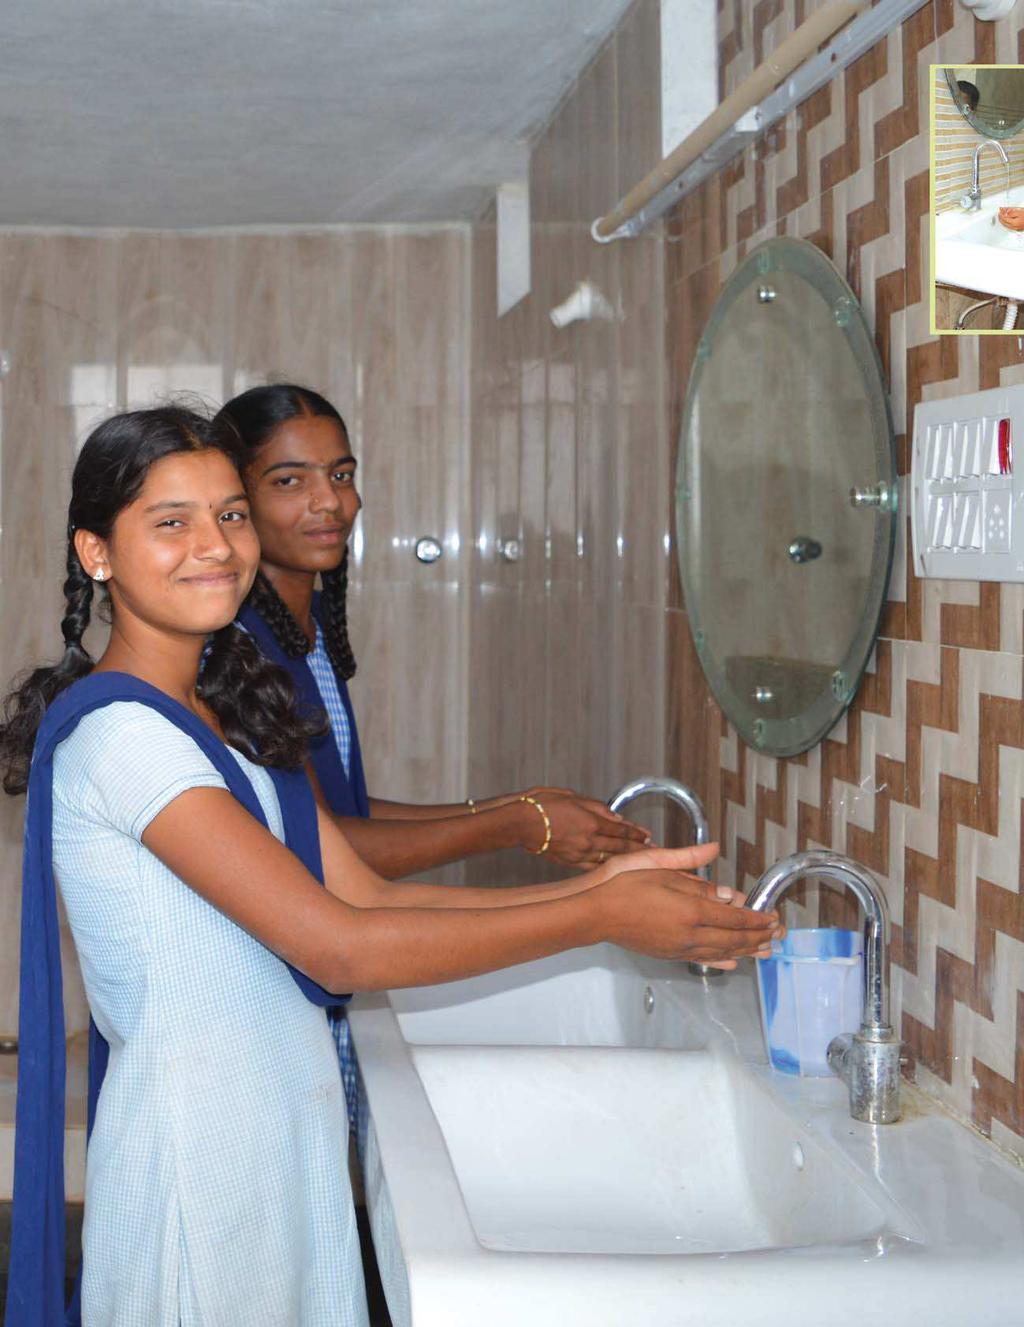 Sanitation We didn t have toilet facility in our school. Girls were embarrassed to use outdoor Aurobindo Pharma has intervened by constructing modern well facilitated toilets.